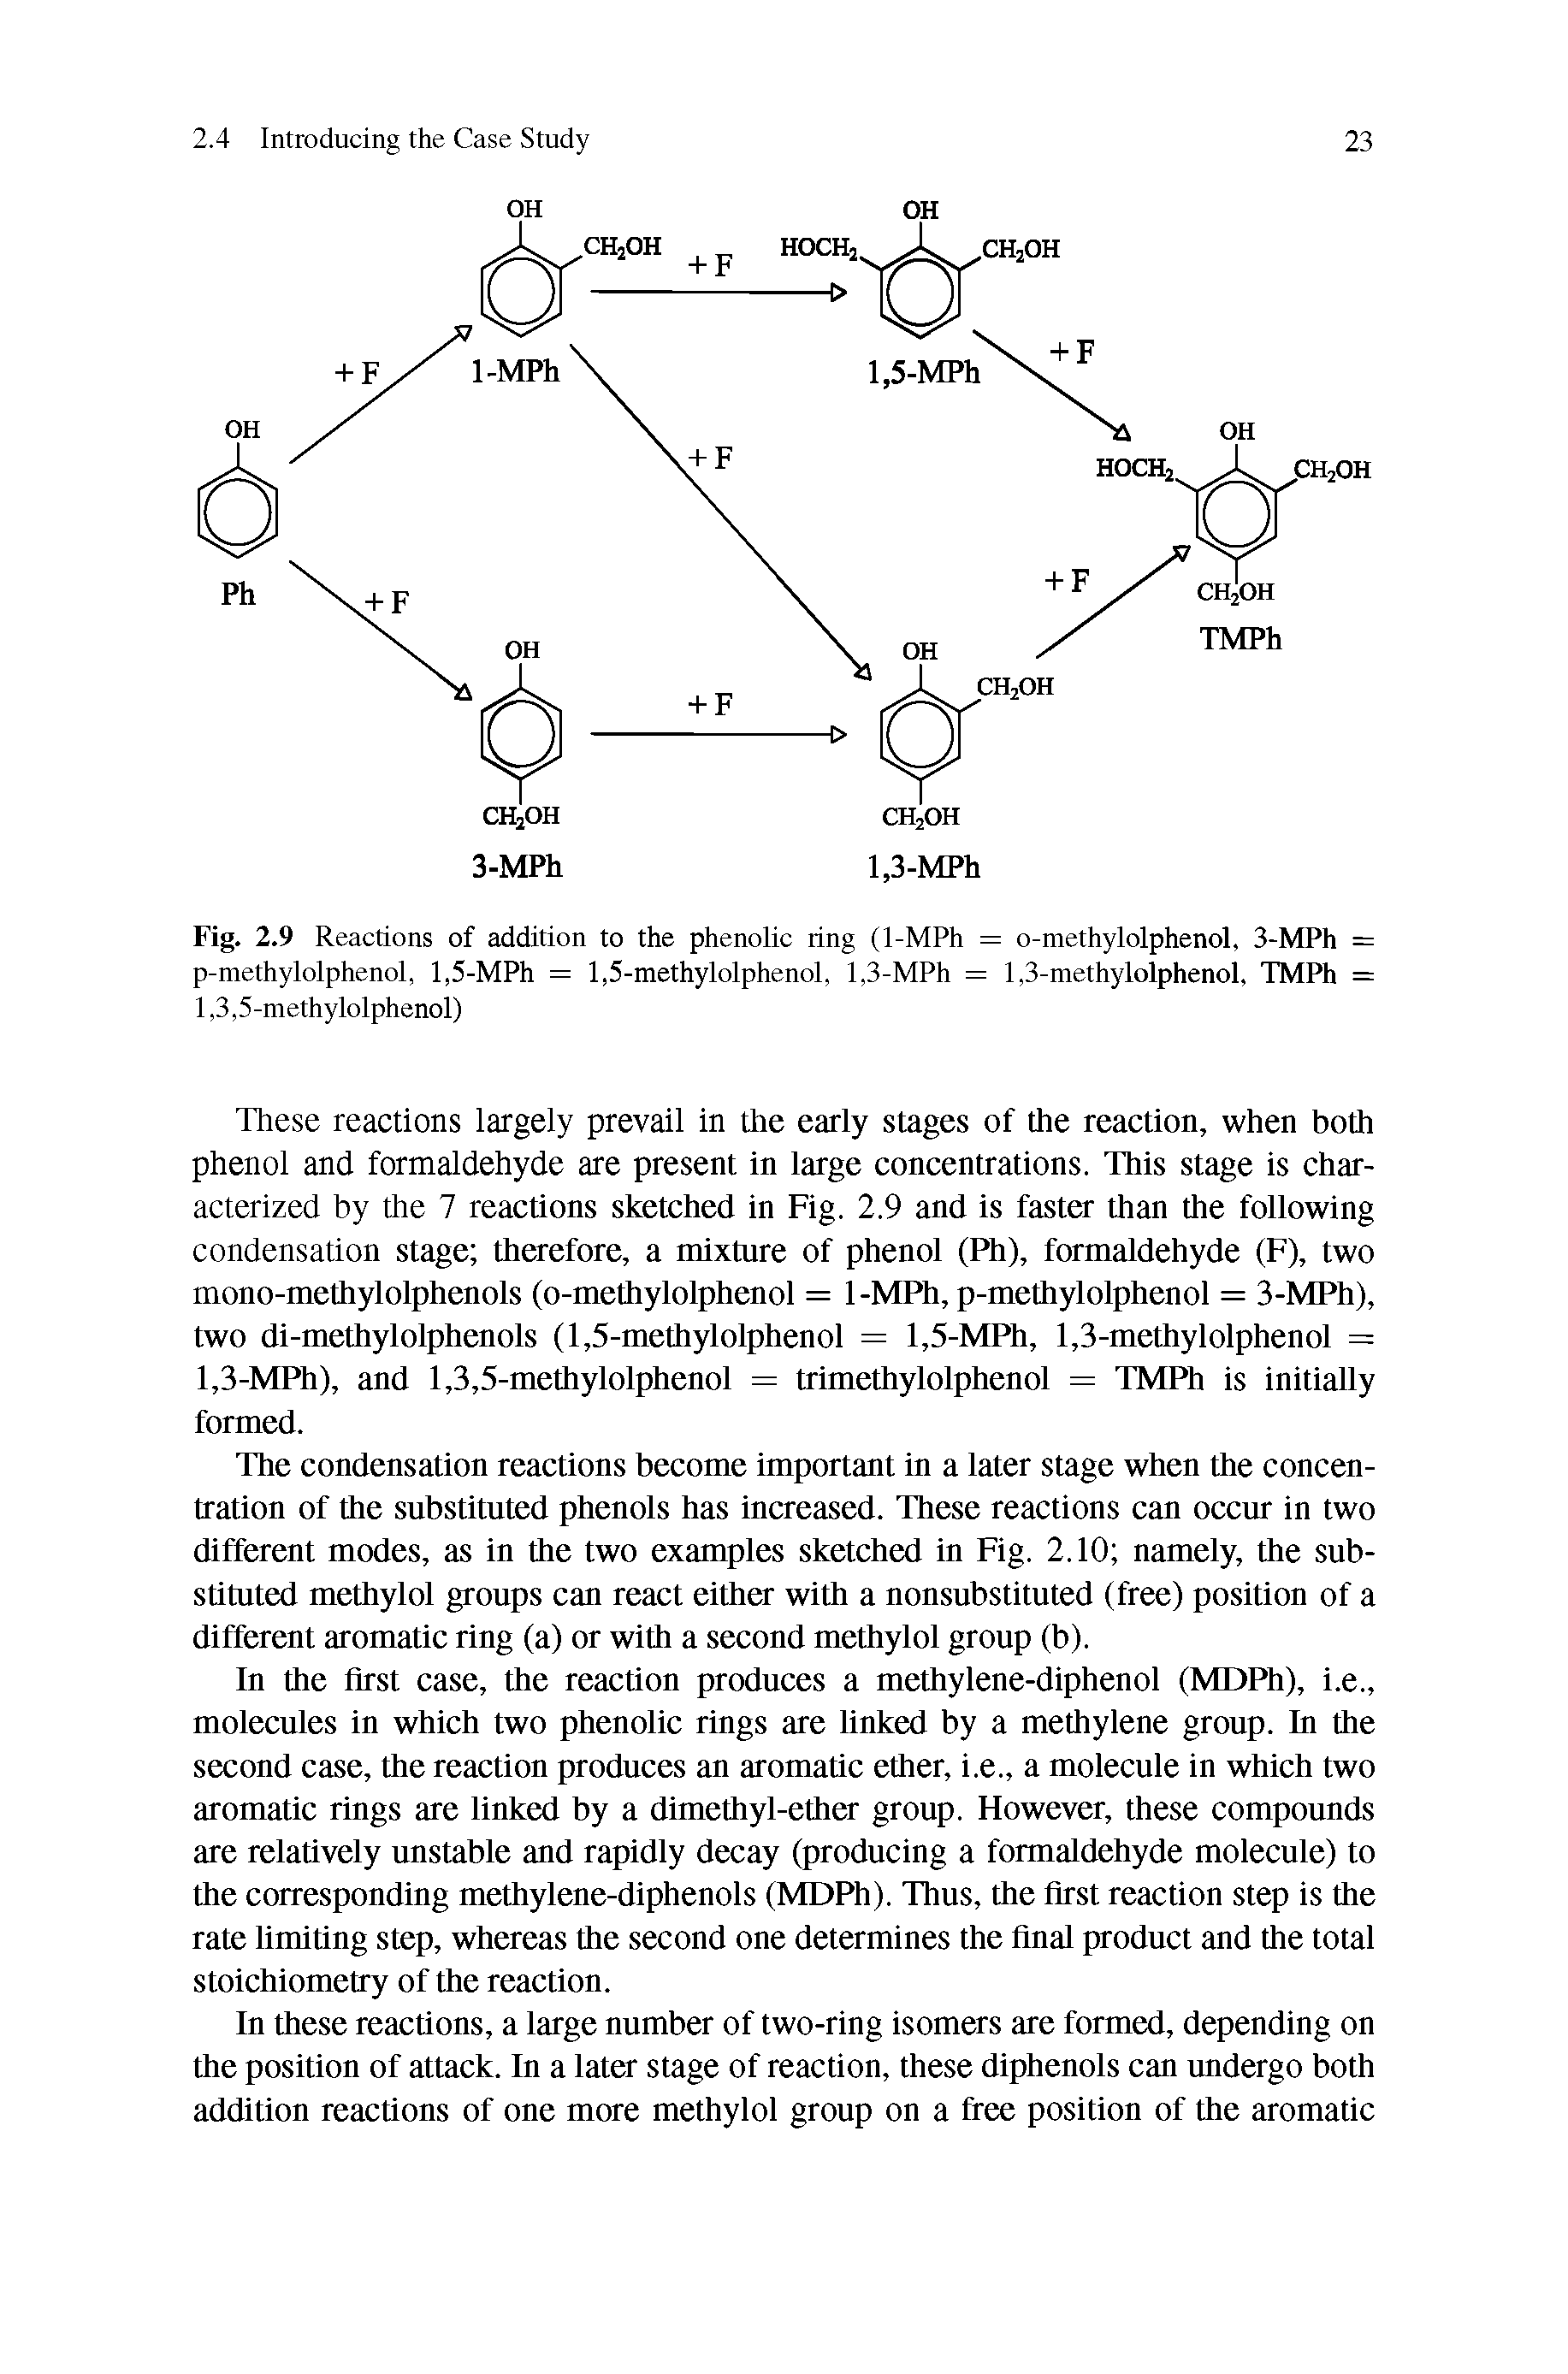 Fig. 2.9 Reactions of addition to the phenolic ting (1-MPh = o-methylolphenol, 3-MPh = p-methylolphenol, 1,5-MPh = 1,5-methylolphenol, 1,3-MPh = 1,3-methylolphenol, TMPh = 1,3,5-methylolphenol)...